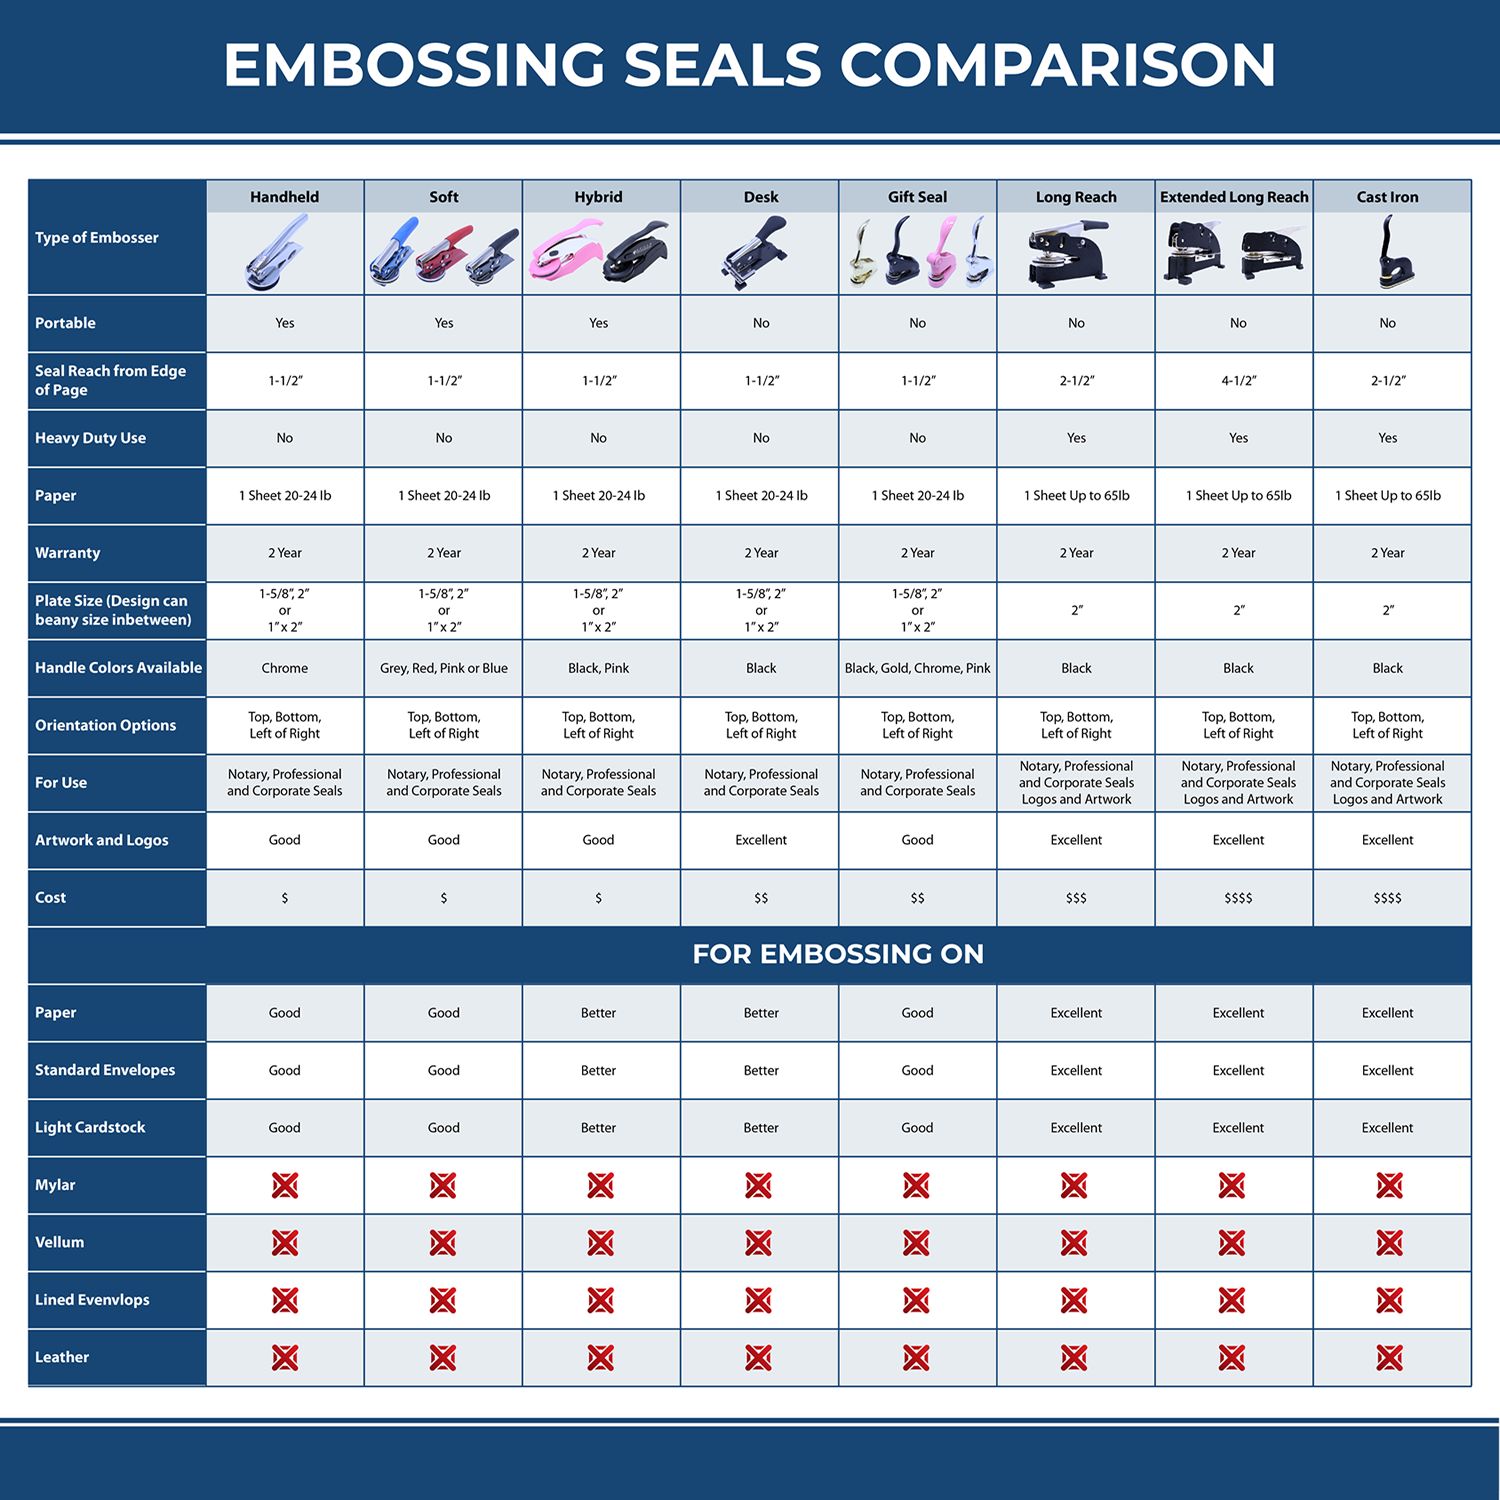 A comparison chart for the different types of mount models available for the Extended Long Reach New York Surveyor Embosser.